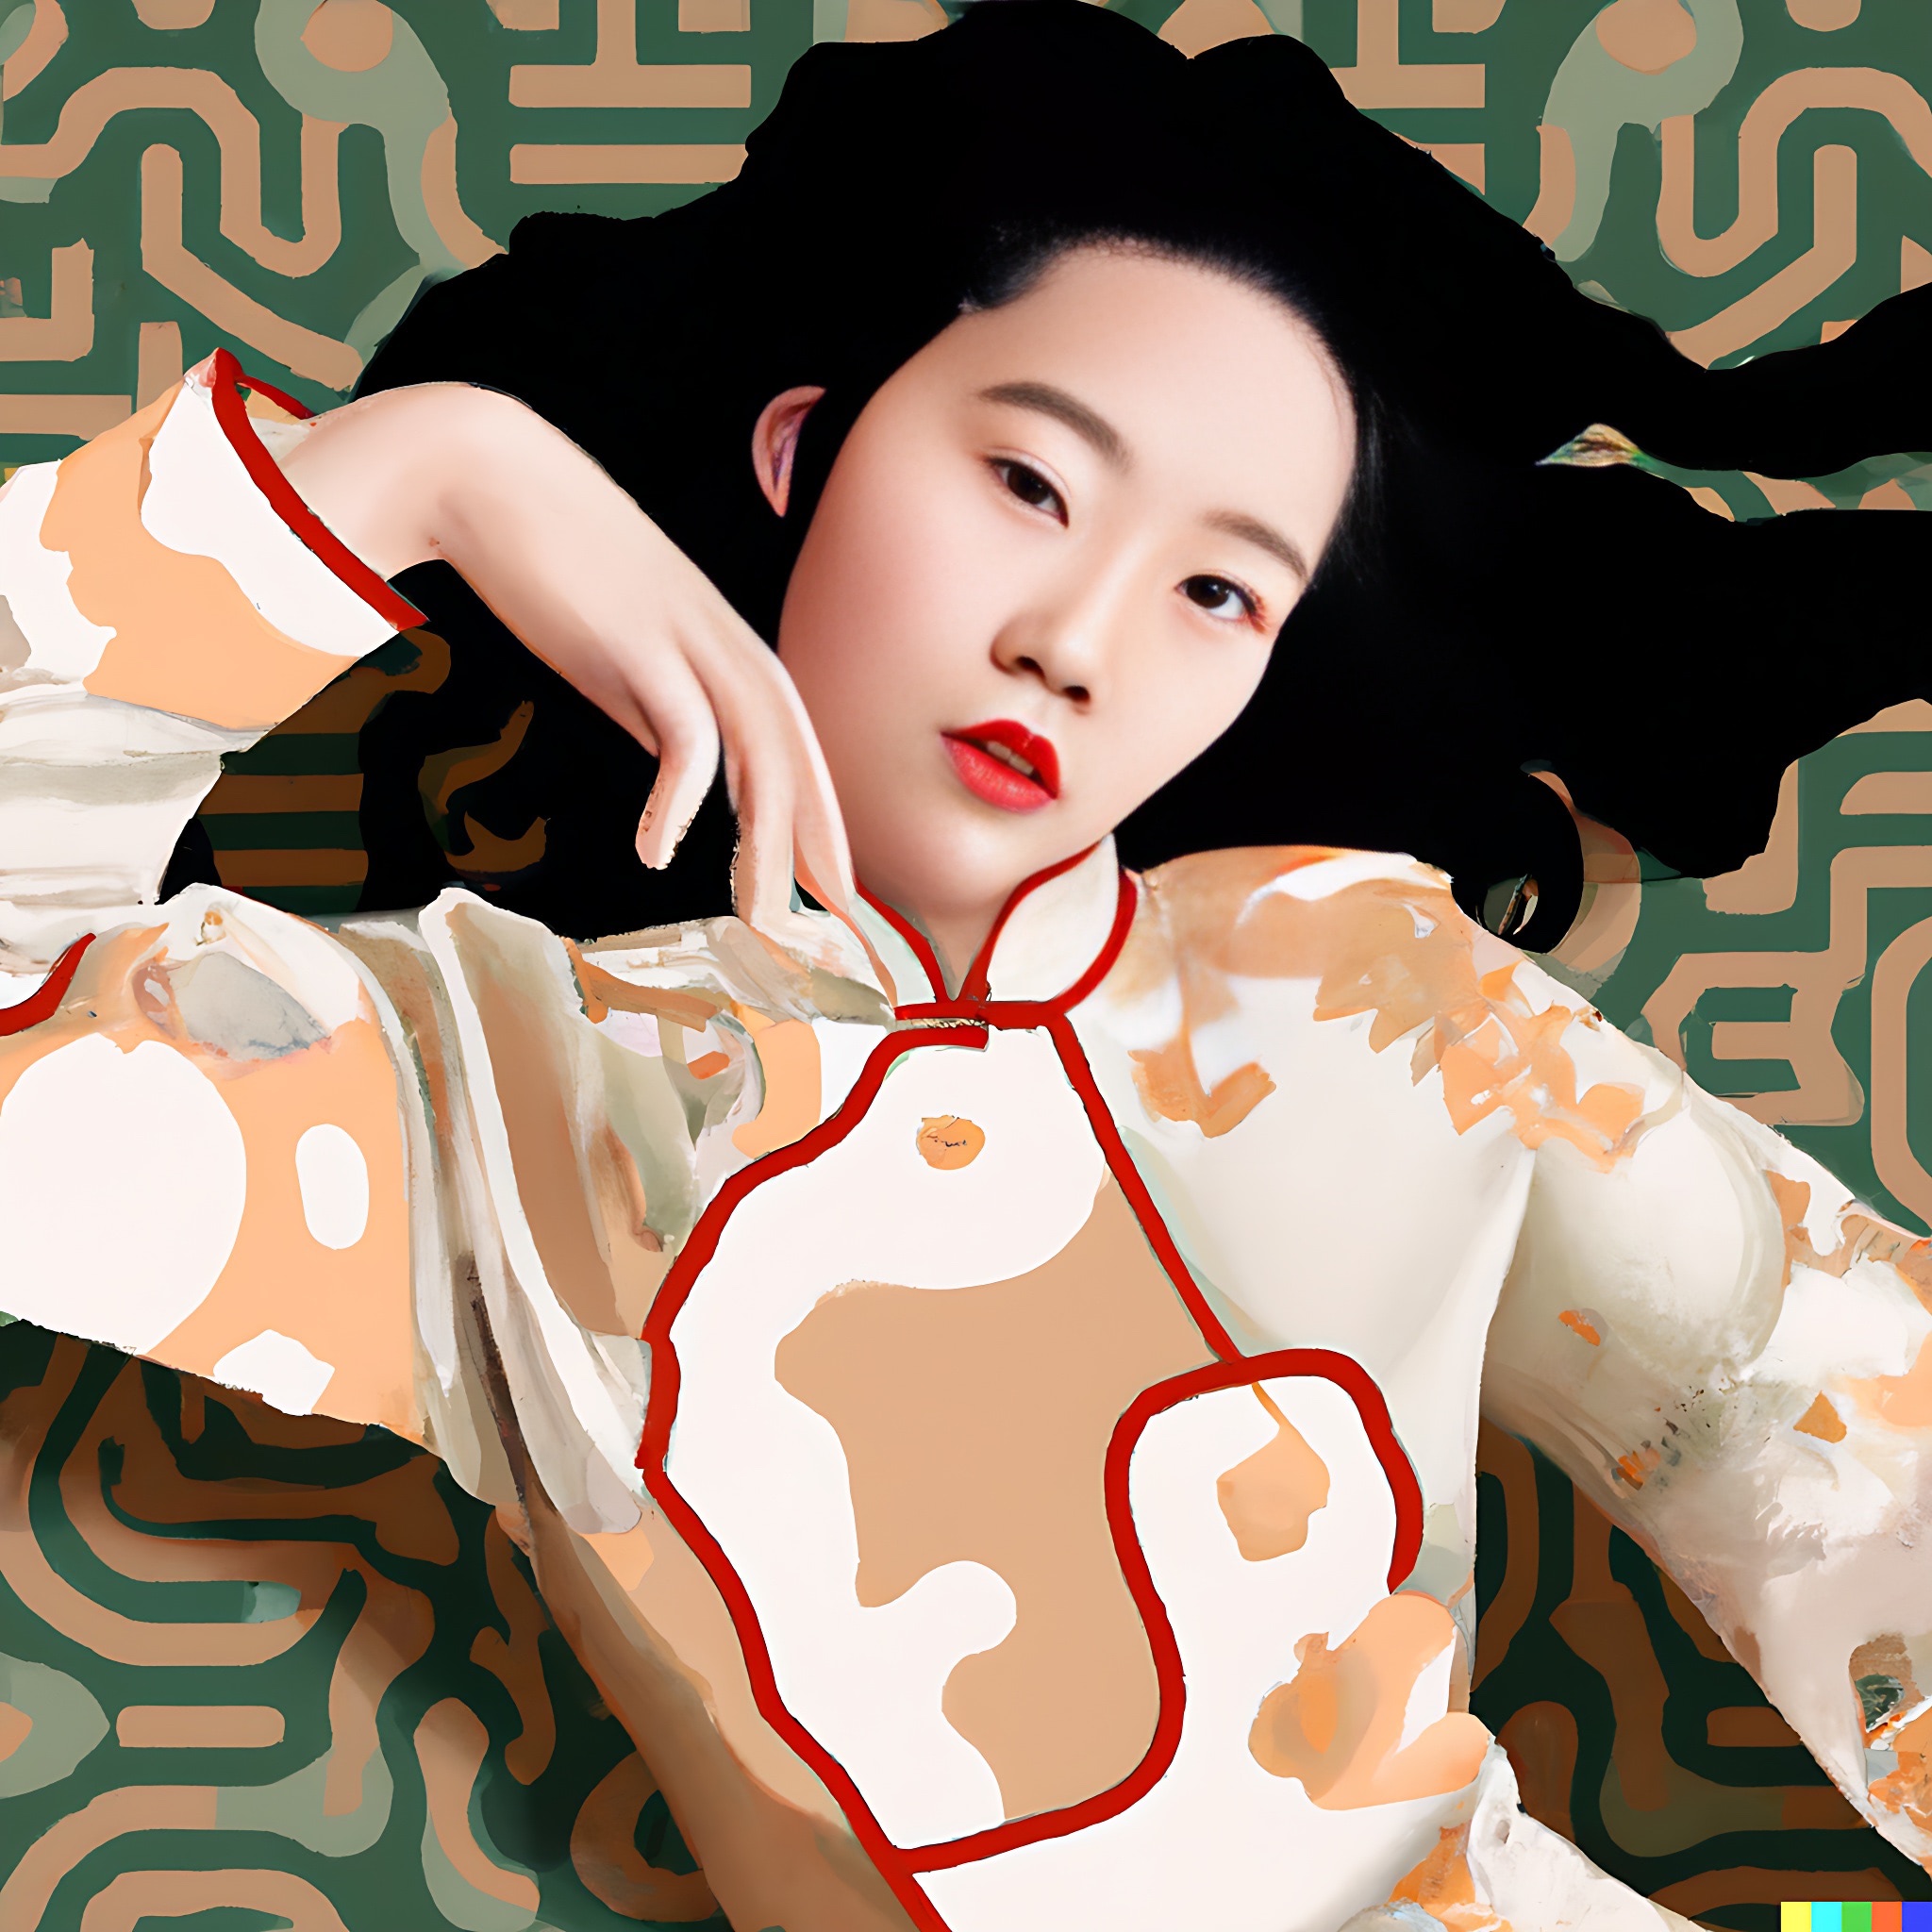 women-in-traditional-chinese-with-japanese-pattern-in-the-background-3